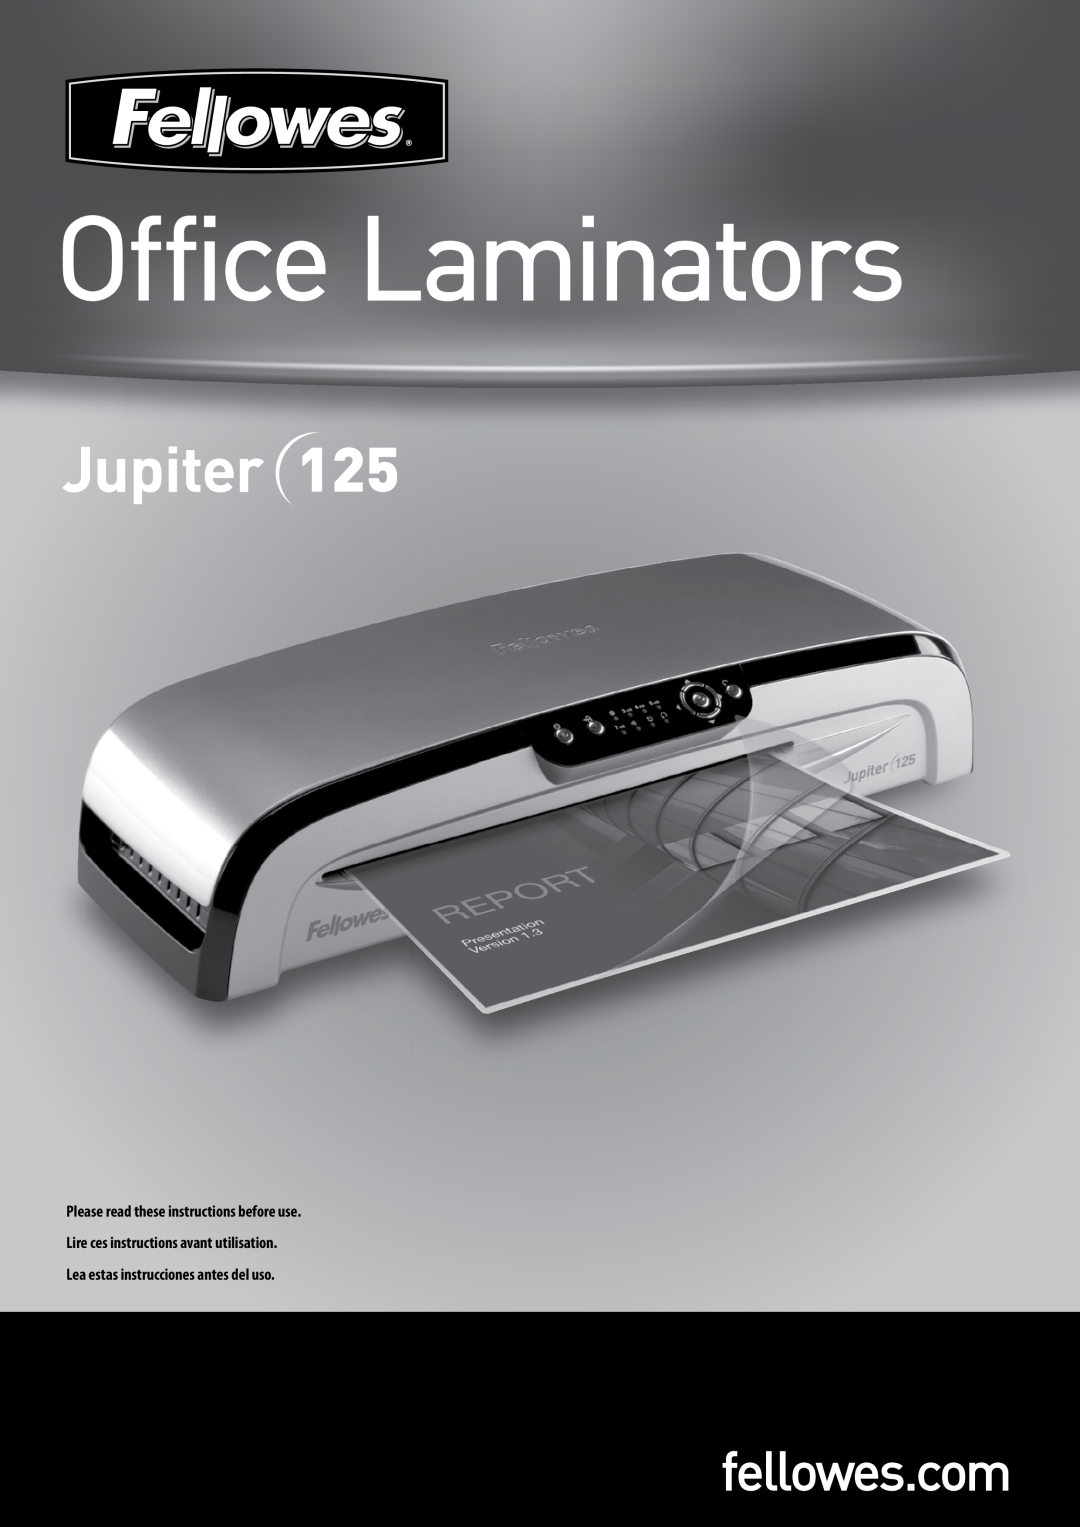 Fellowes 125 manual Office Laminators, fellowes.com, Please read these instructions before use 